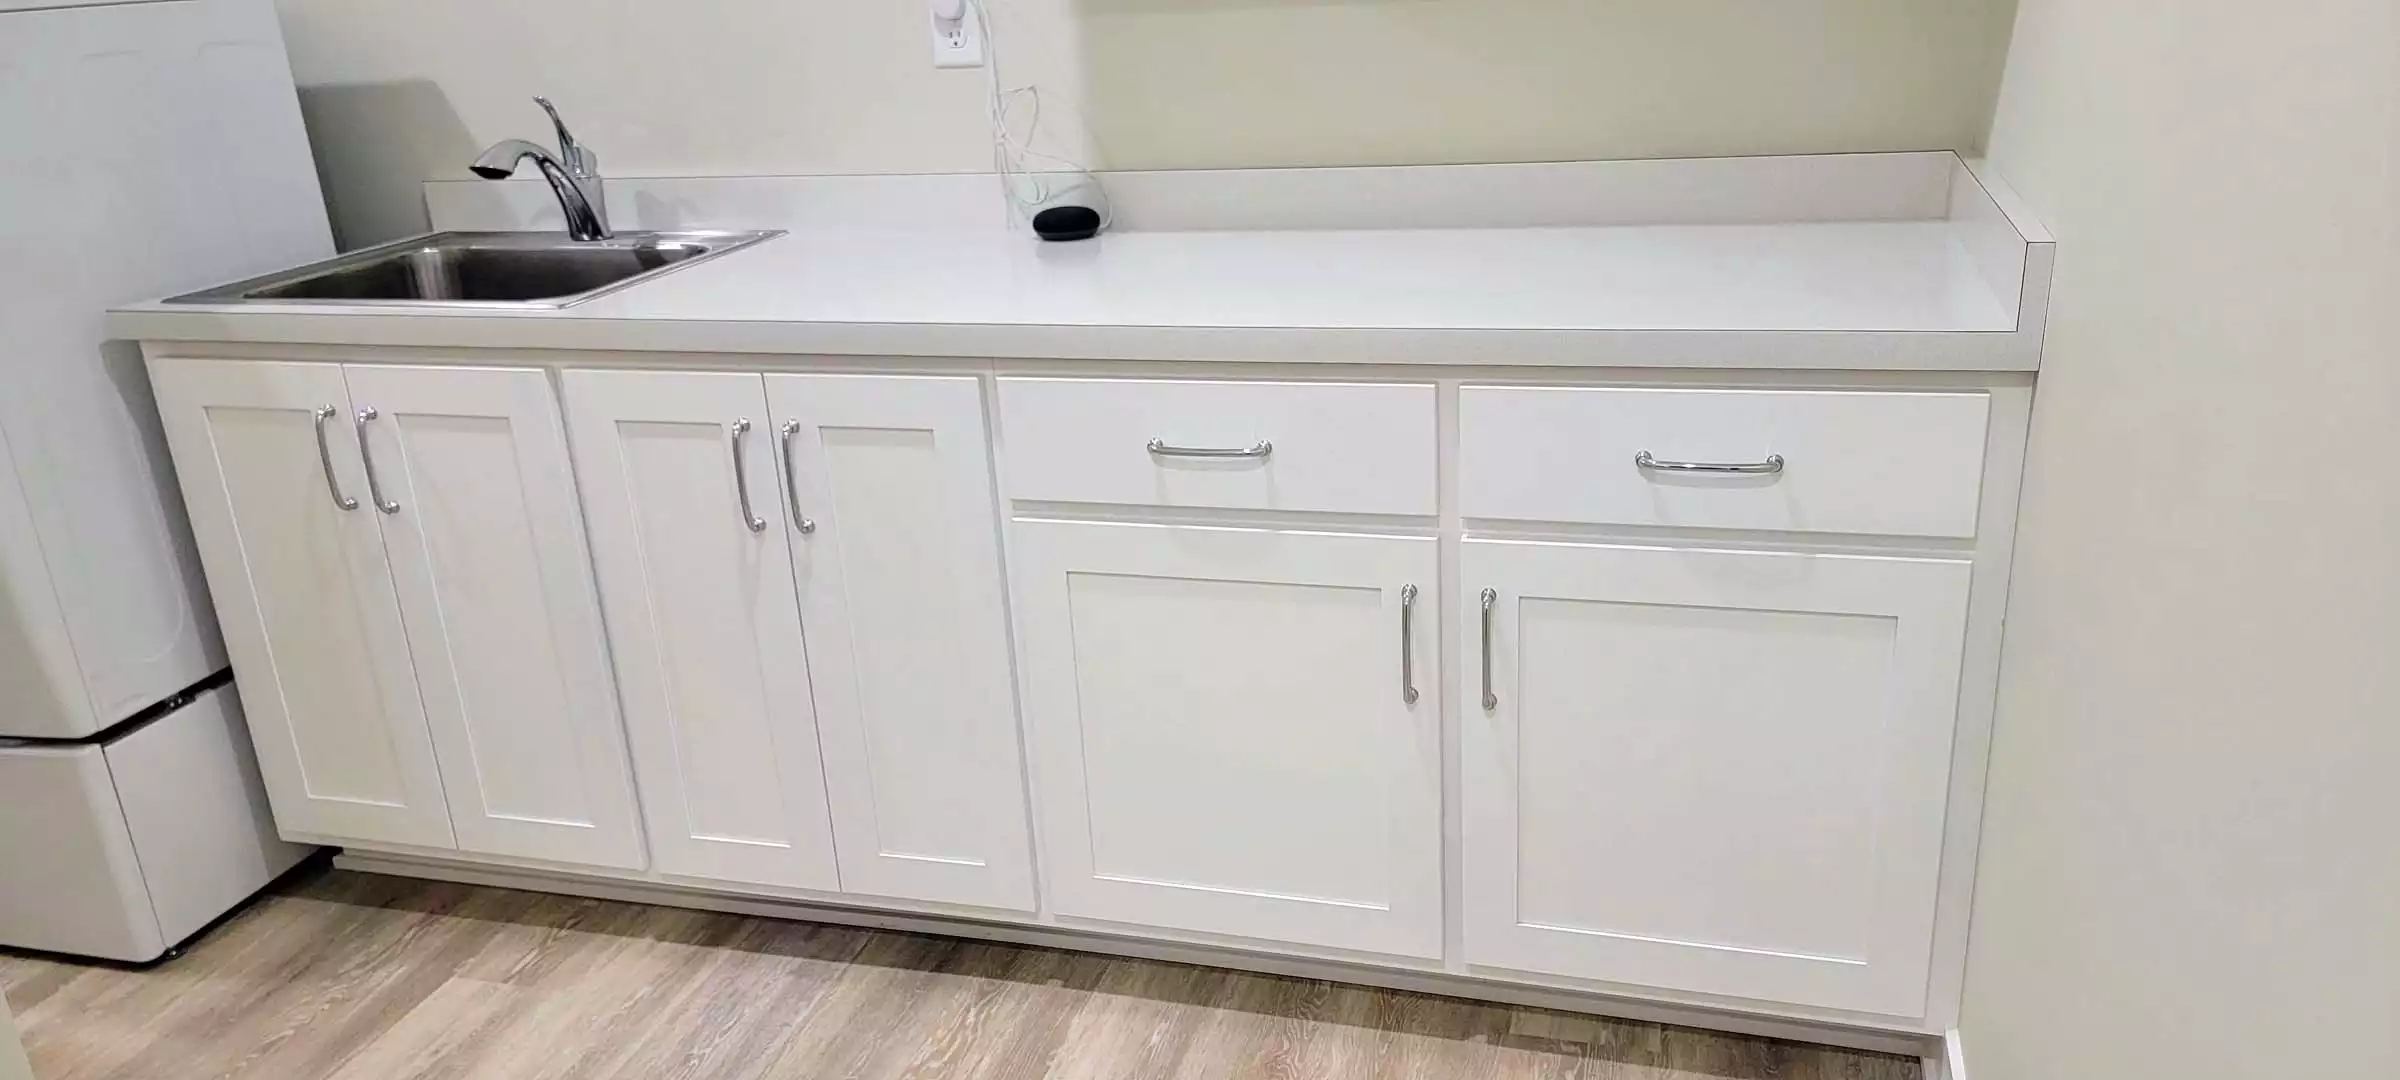 The perfect Laundry room w/ Custom cabinets